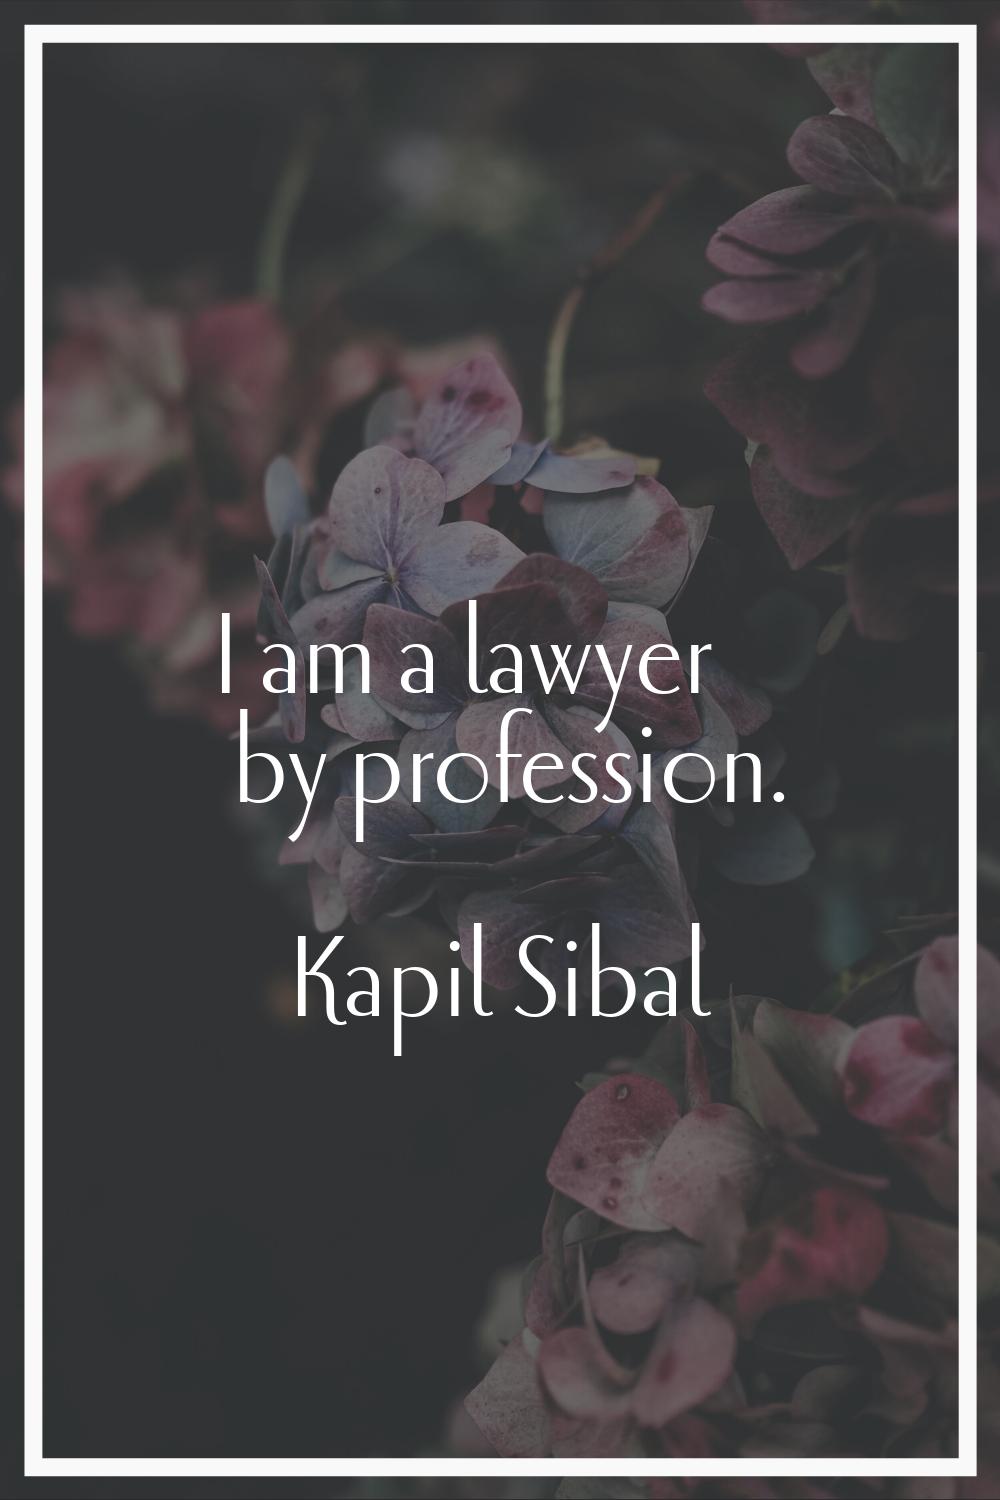 I am a lawyer by profession.